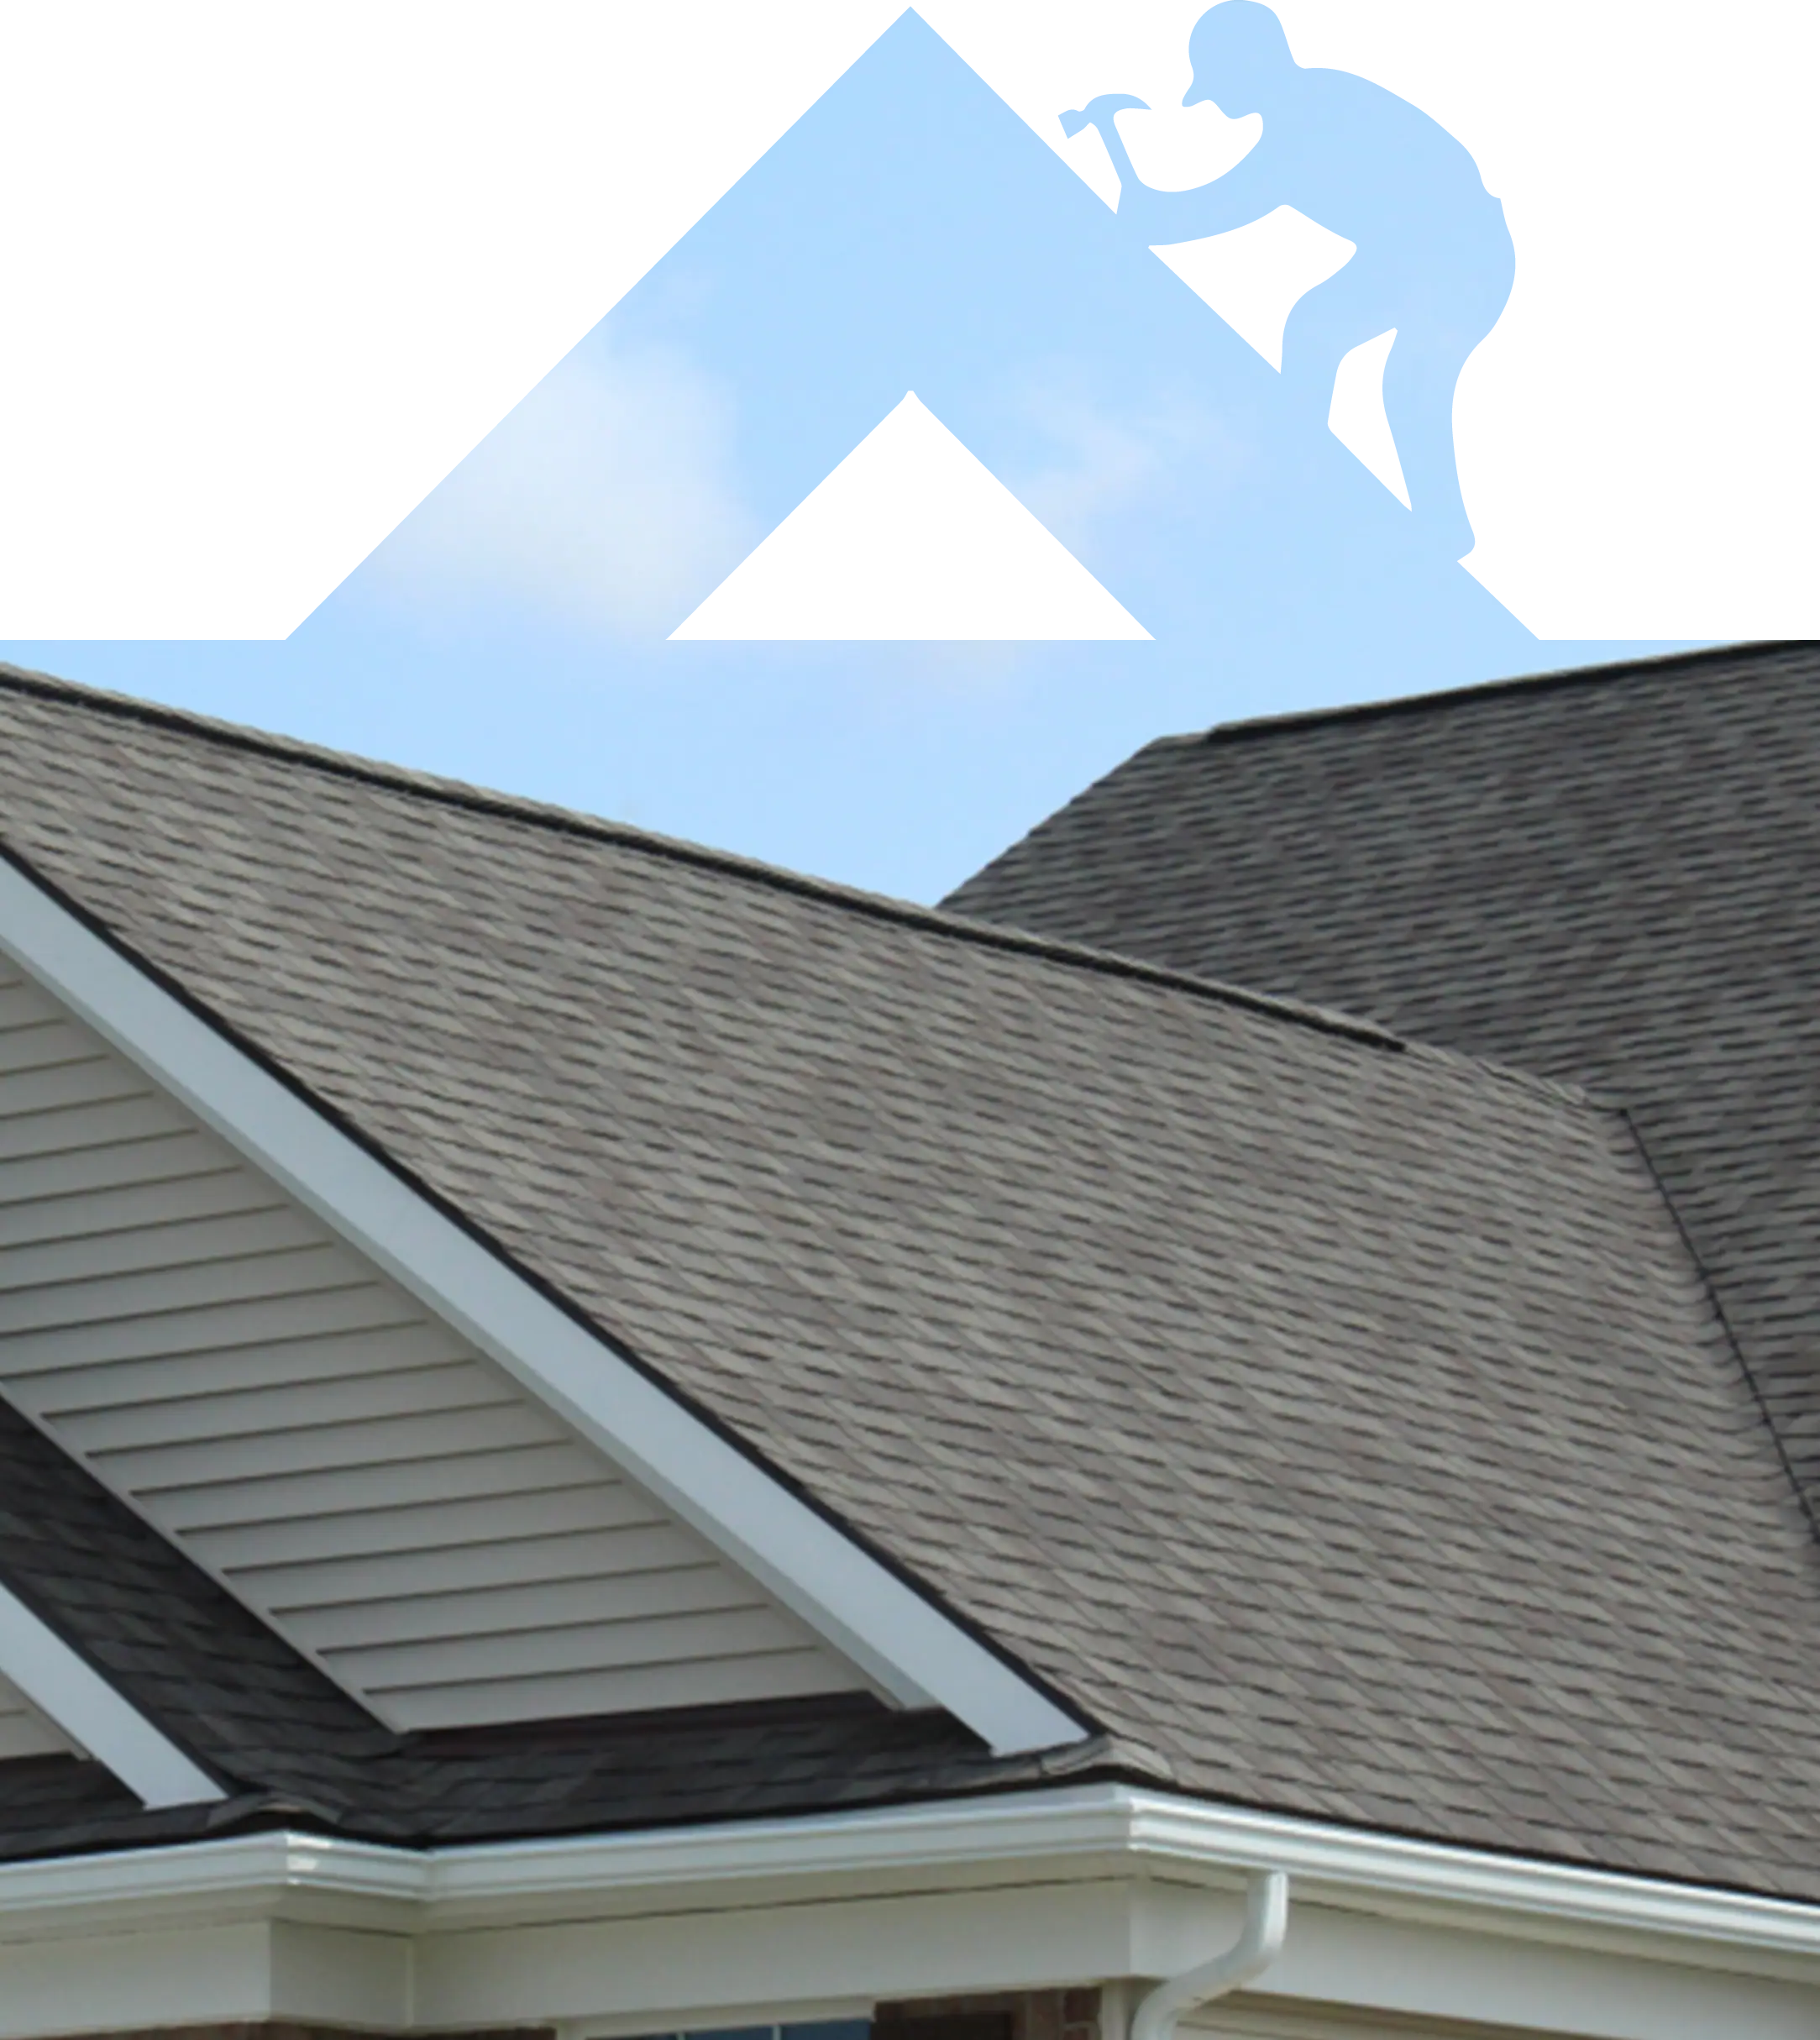 Close-up of a suburban home's roofing with grey shingles under a clear blue sky.